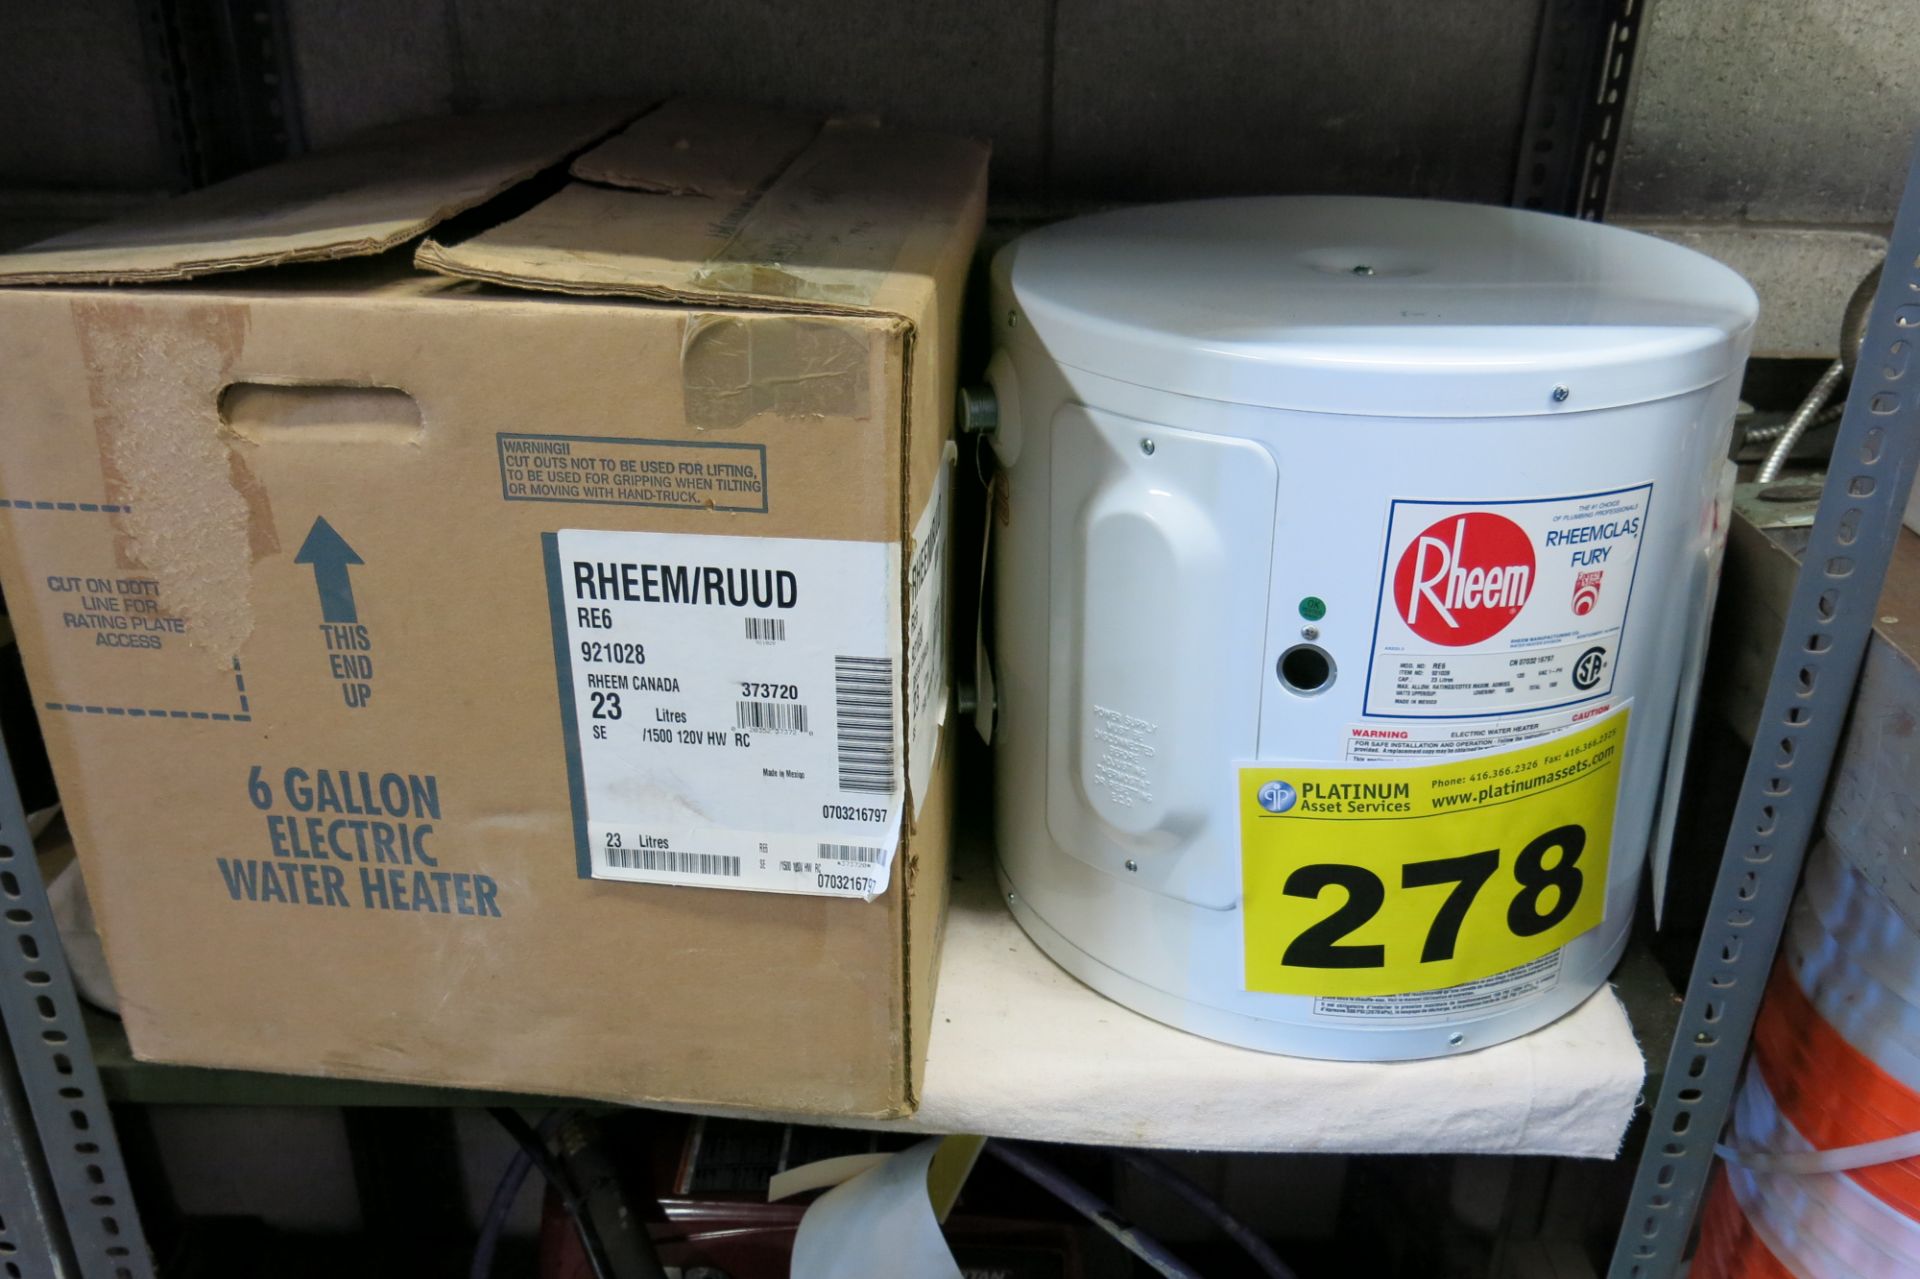 RHEEM, RE6, 23 LITRE, ELECTRIC WATER HEATER -NEW (LOCATED IN MISSISSAUGA)